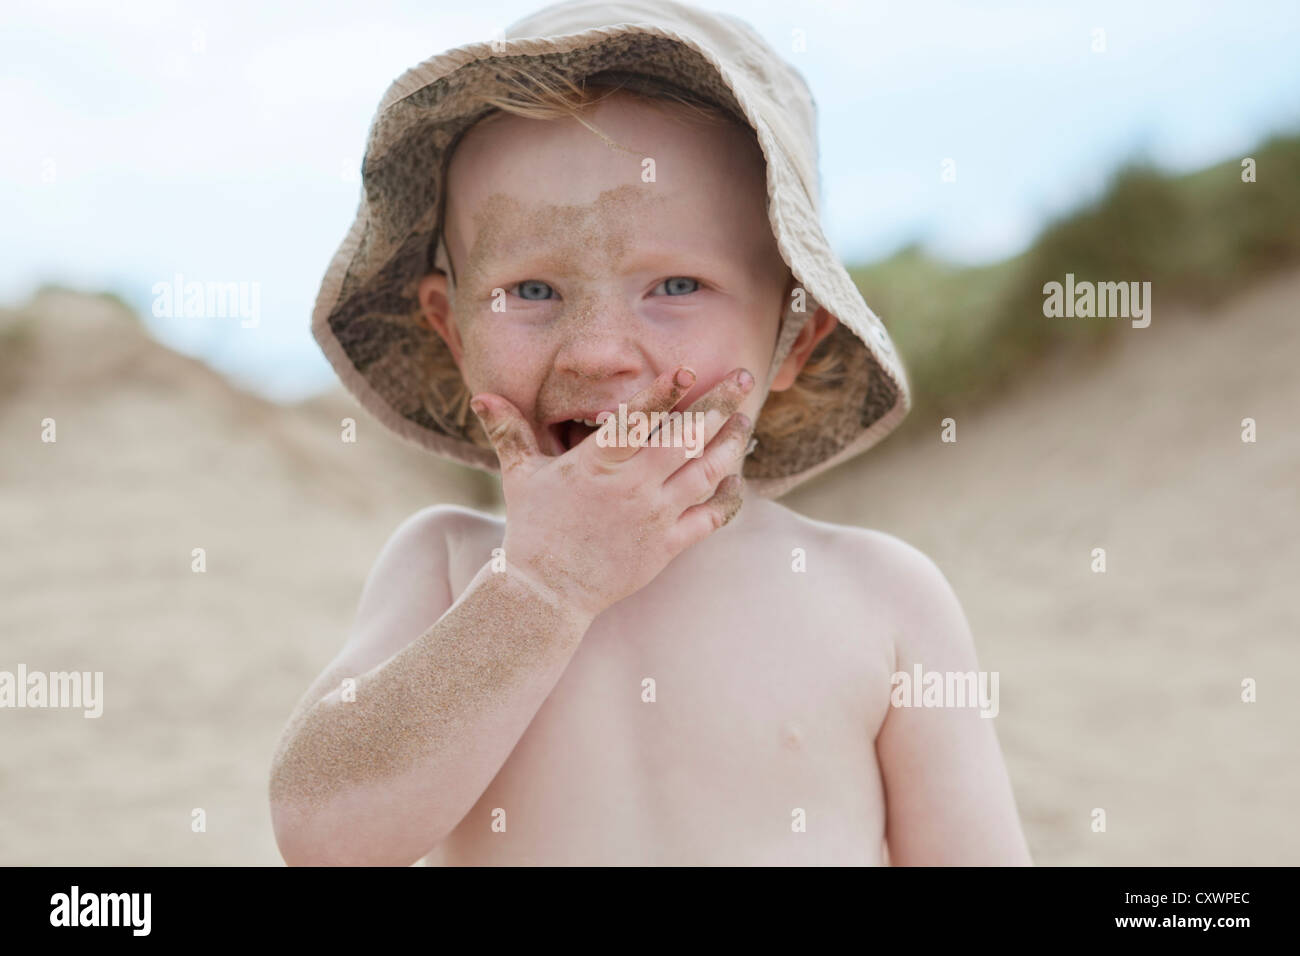 Boy covered in sand on beach Stock Photo